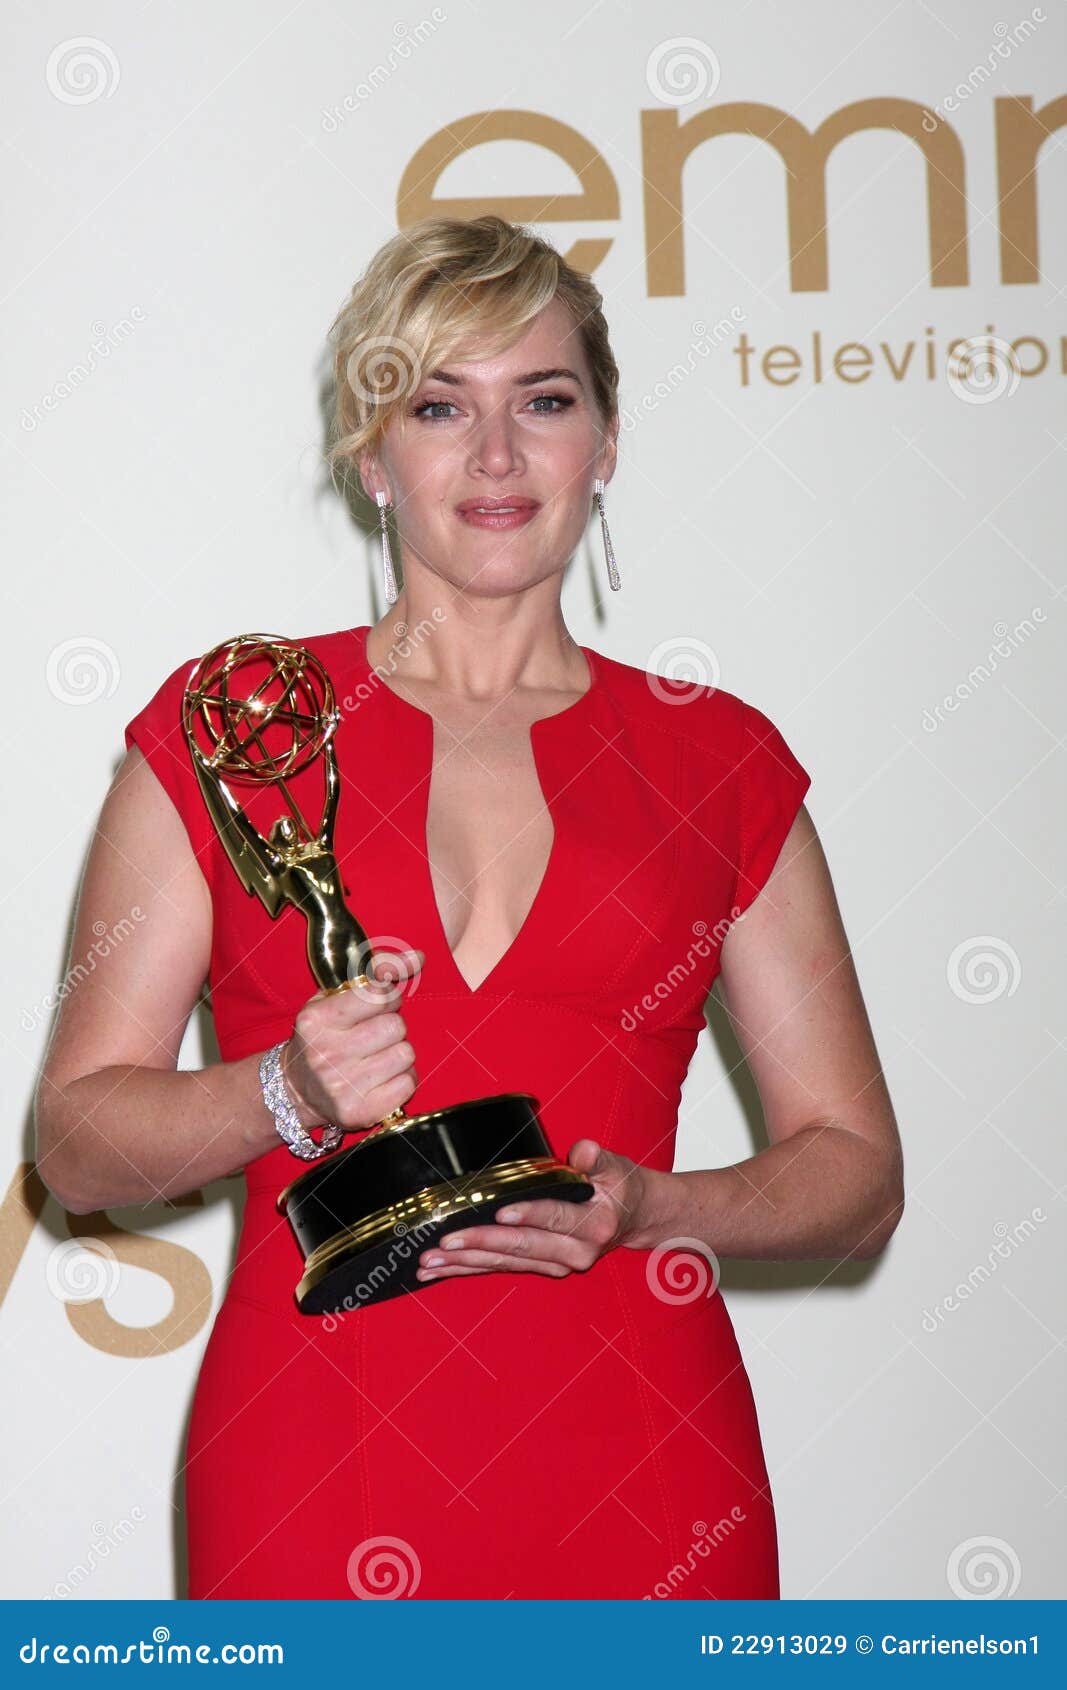 Kate Winslet Editorial Stock Image Image Of Room September 22913029